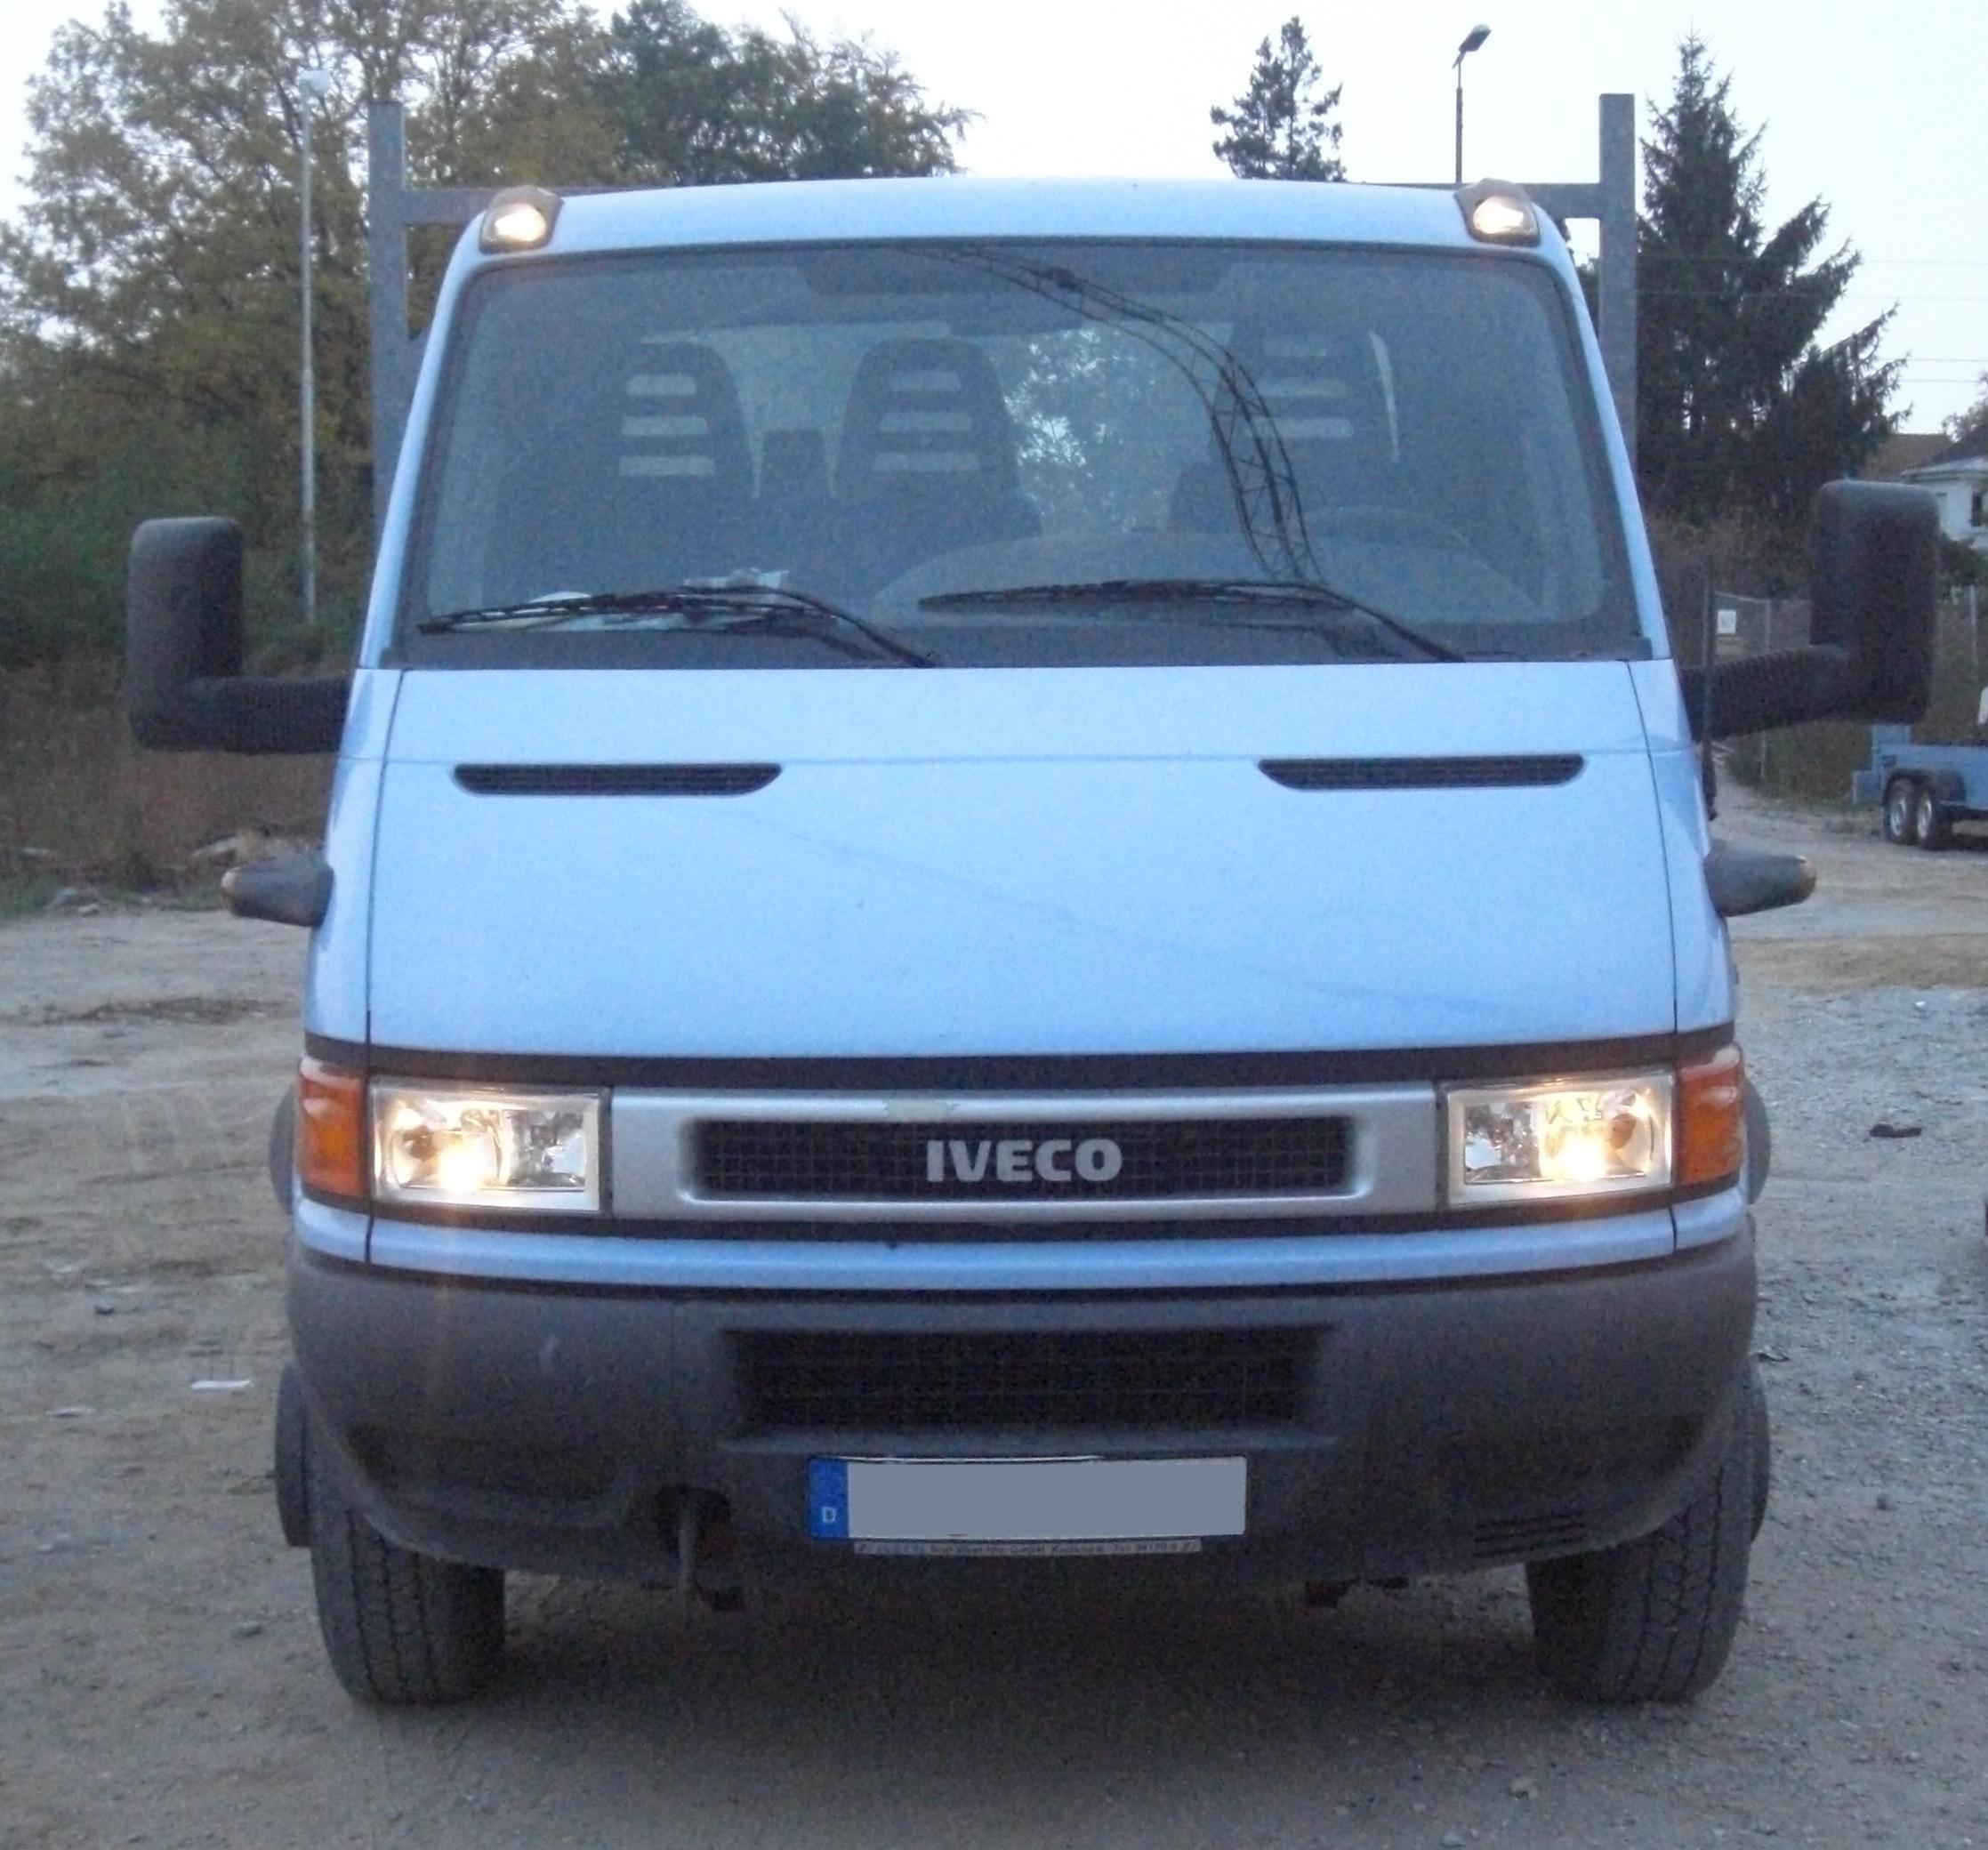 Iveco daily 2007 photo - 1